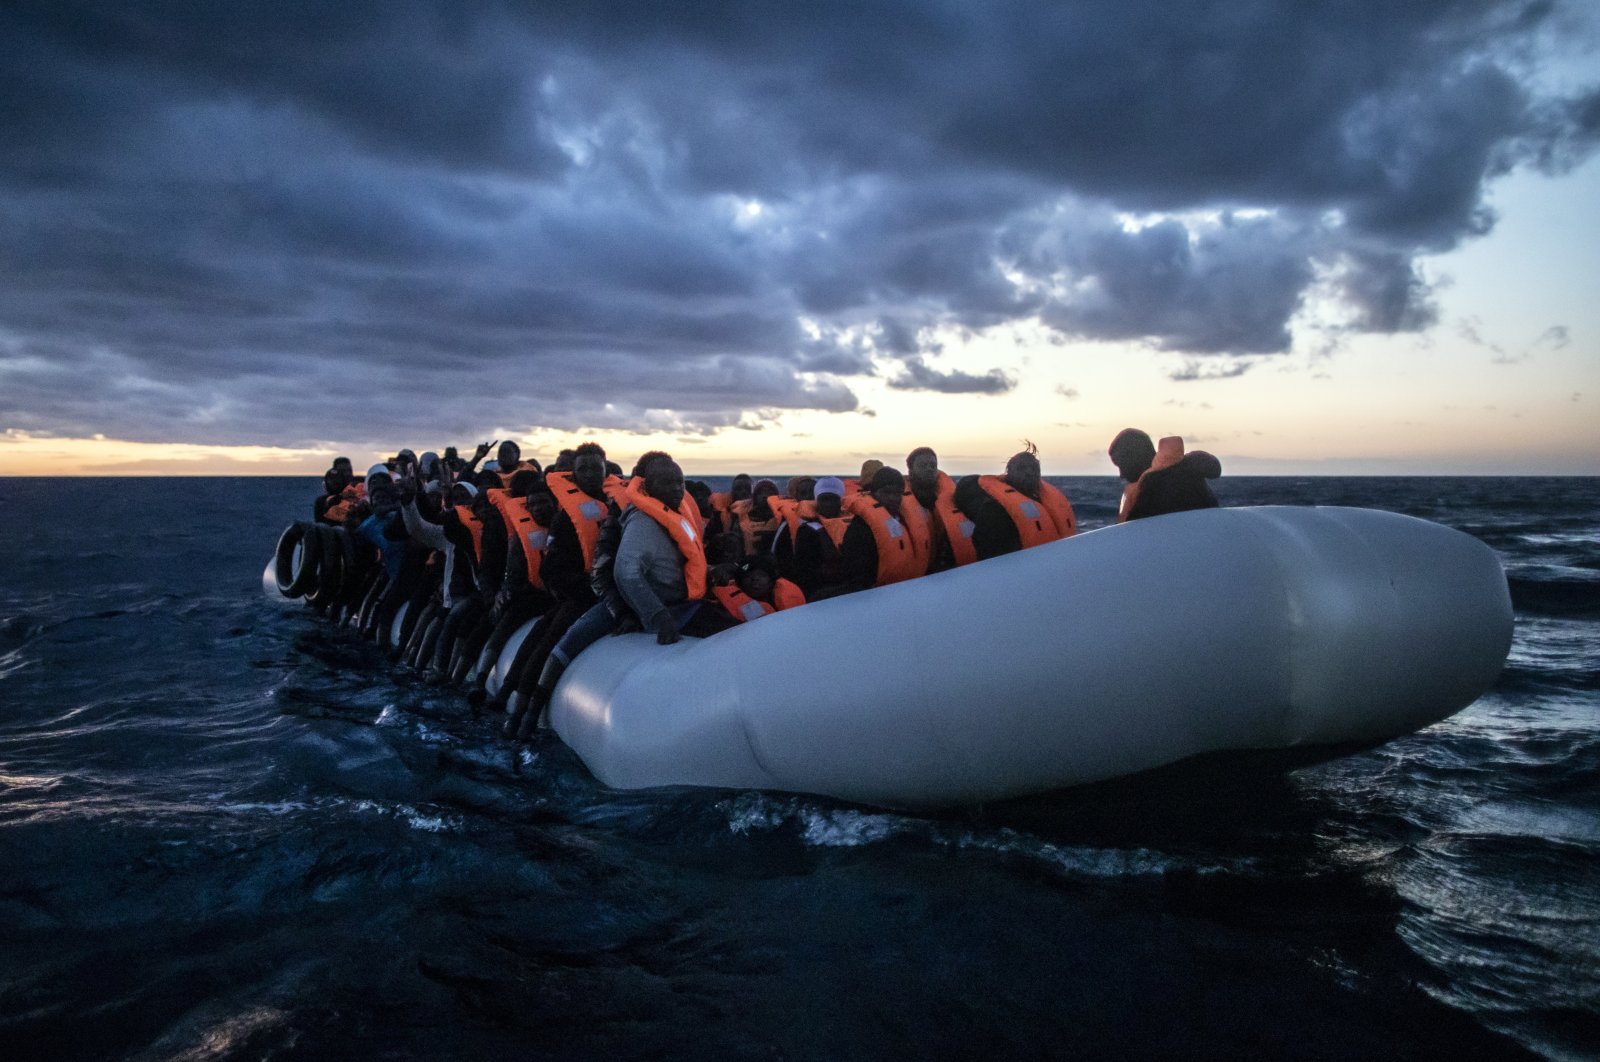 Migrants and refugees from various African nationalities wait on a rubber boat as aid workers on a rescue vessel of the Spanish NGO Open Arms approach in international waters in the Mediterranean Sea, 80 miles off the Libyan coast, Feb. 13, 2021. (AP Photo)